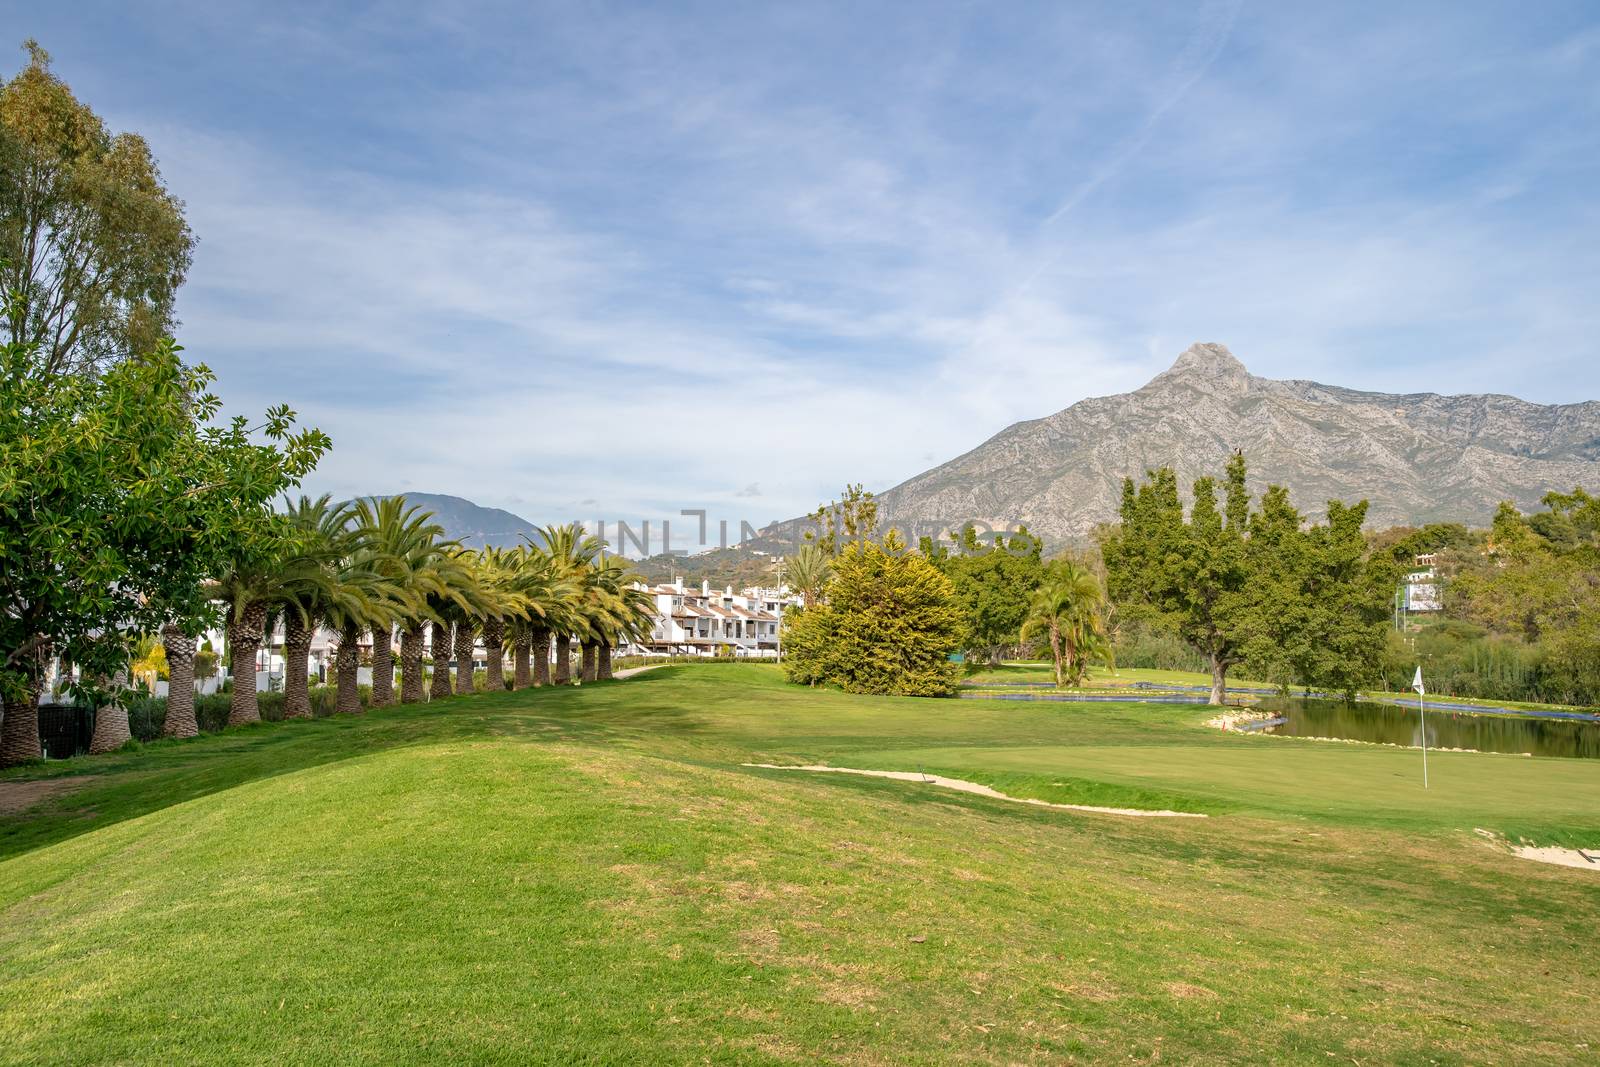 A golf course at the foot of the La Concha mountain in Spain.